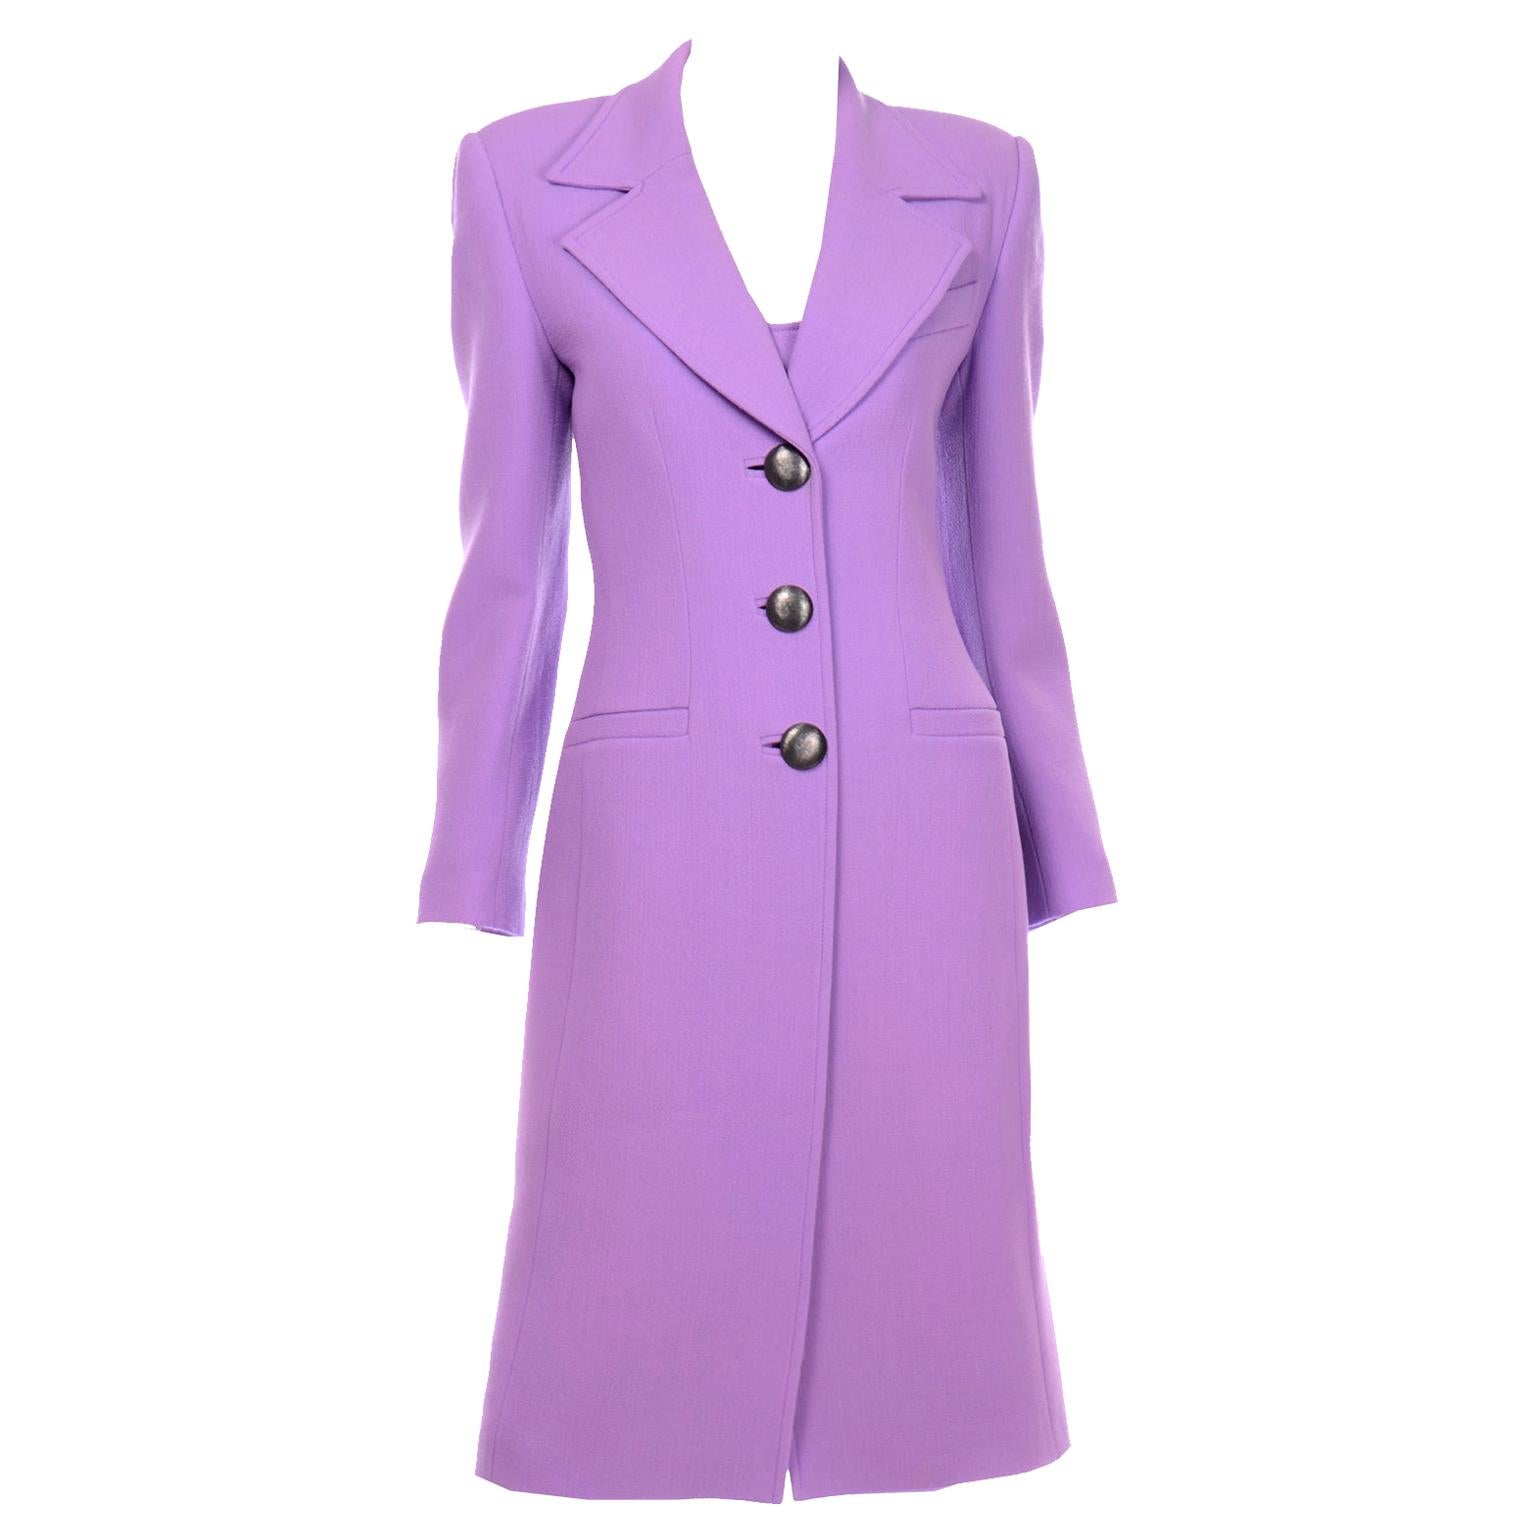 Gai Mattiolo Lavender Purple Dress and Coat Suit in Spring Summer Weight Wool